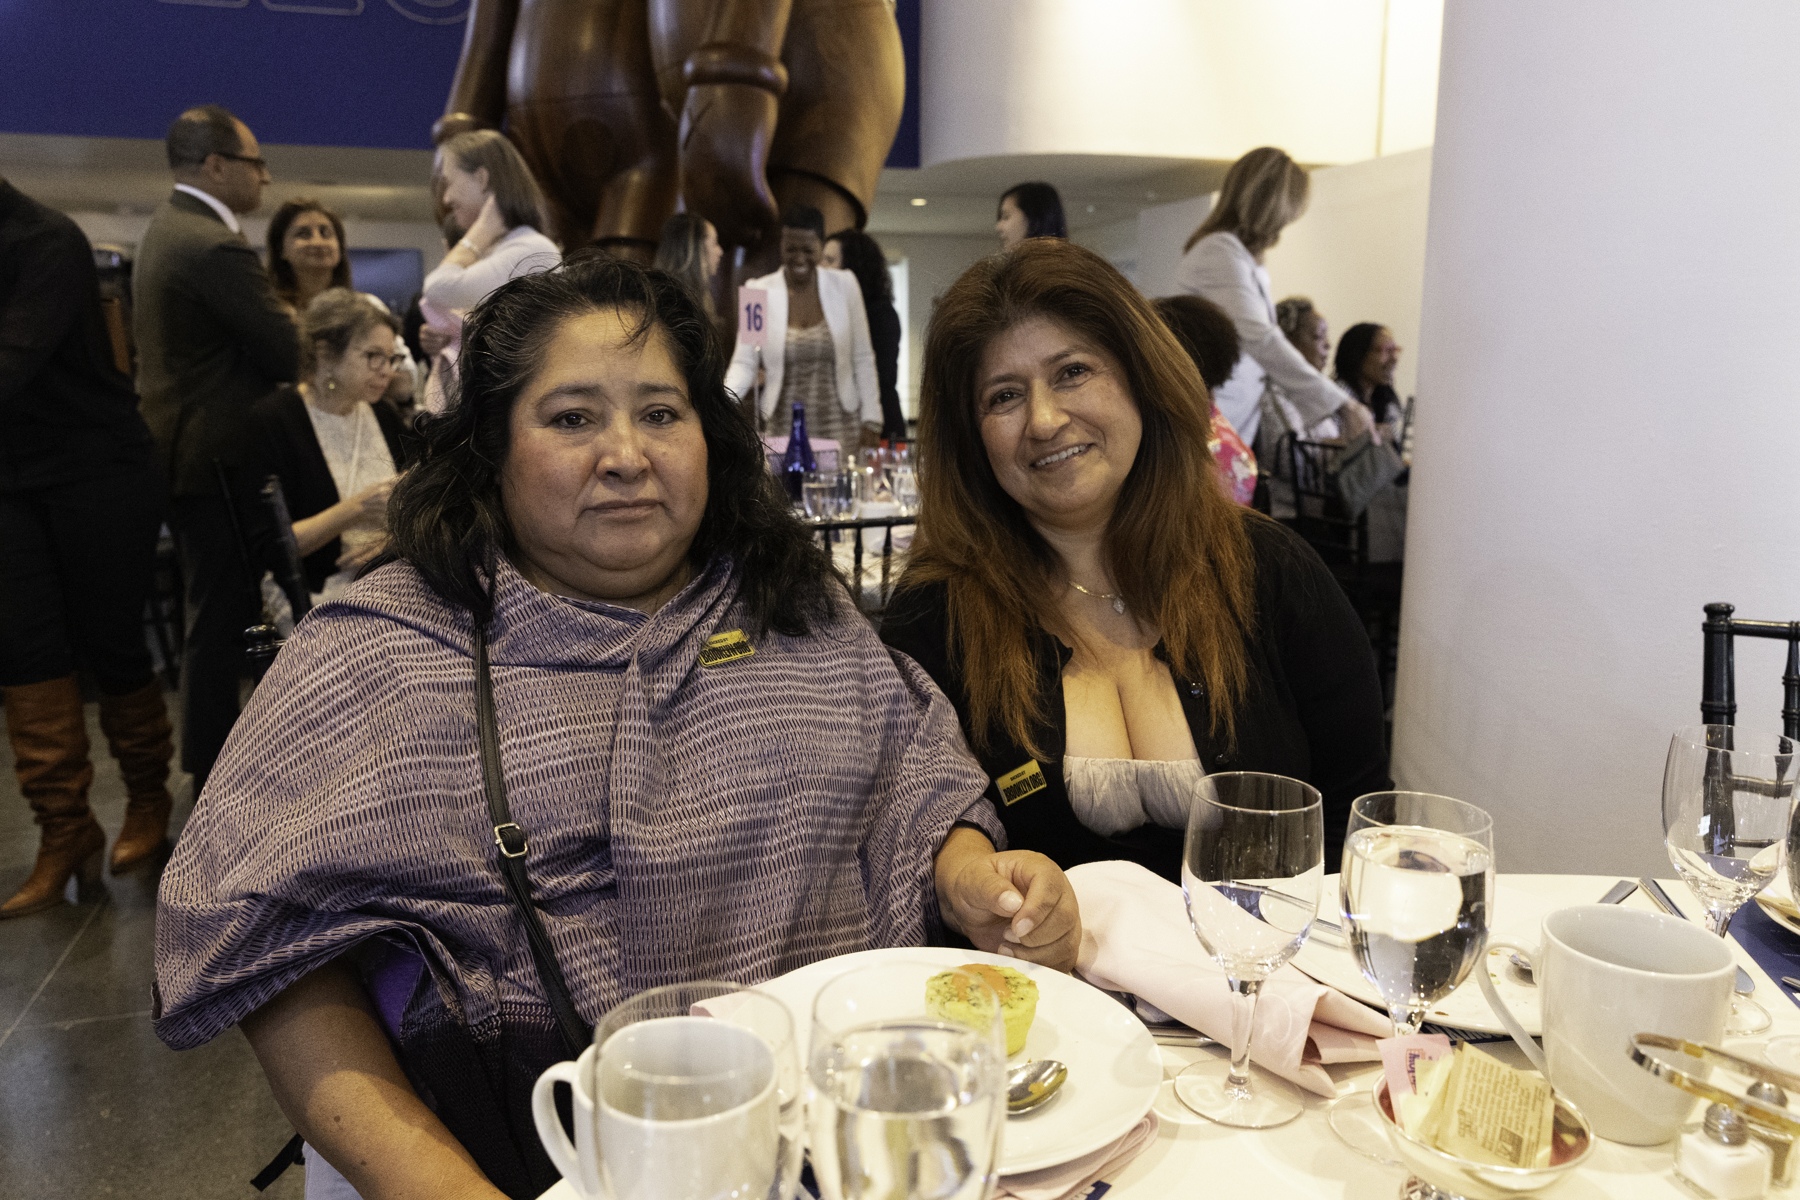 Two women sitting at a dining table during an event.